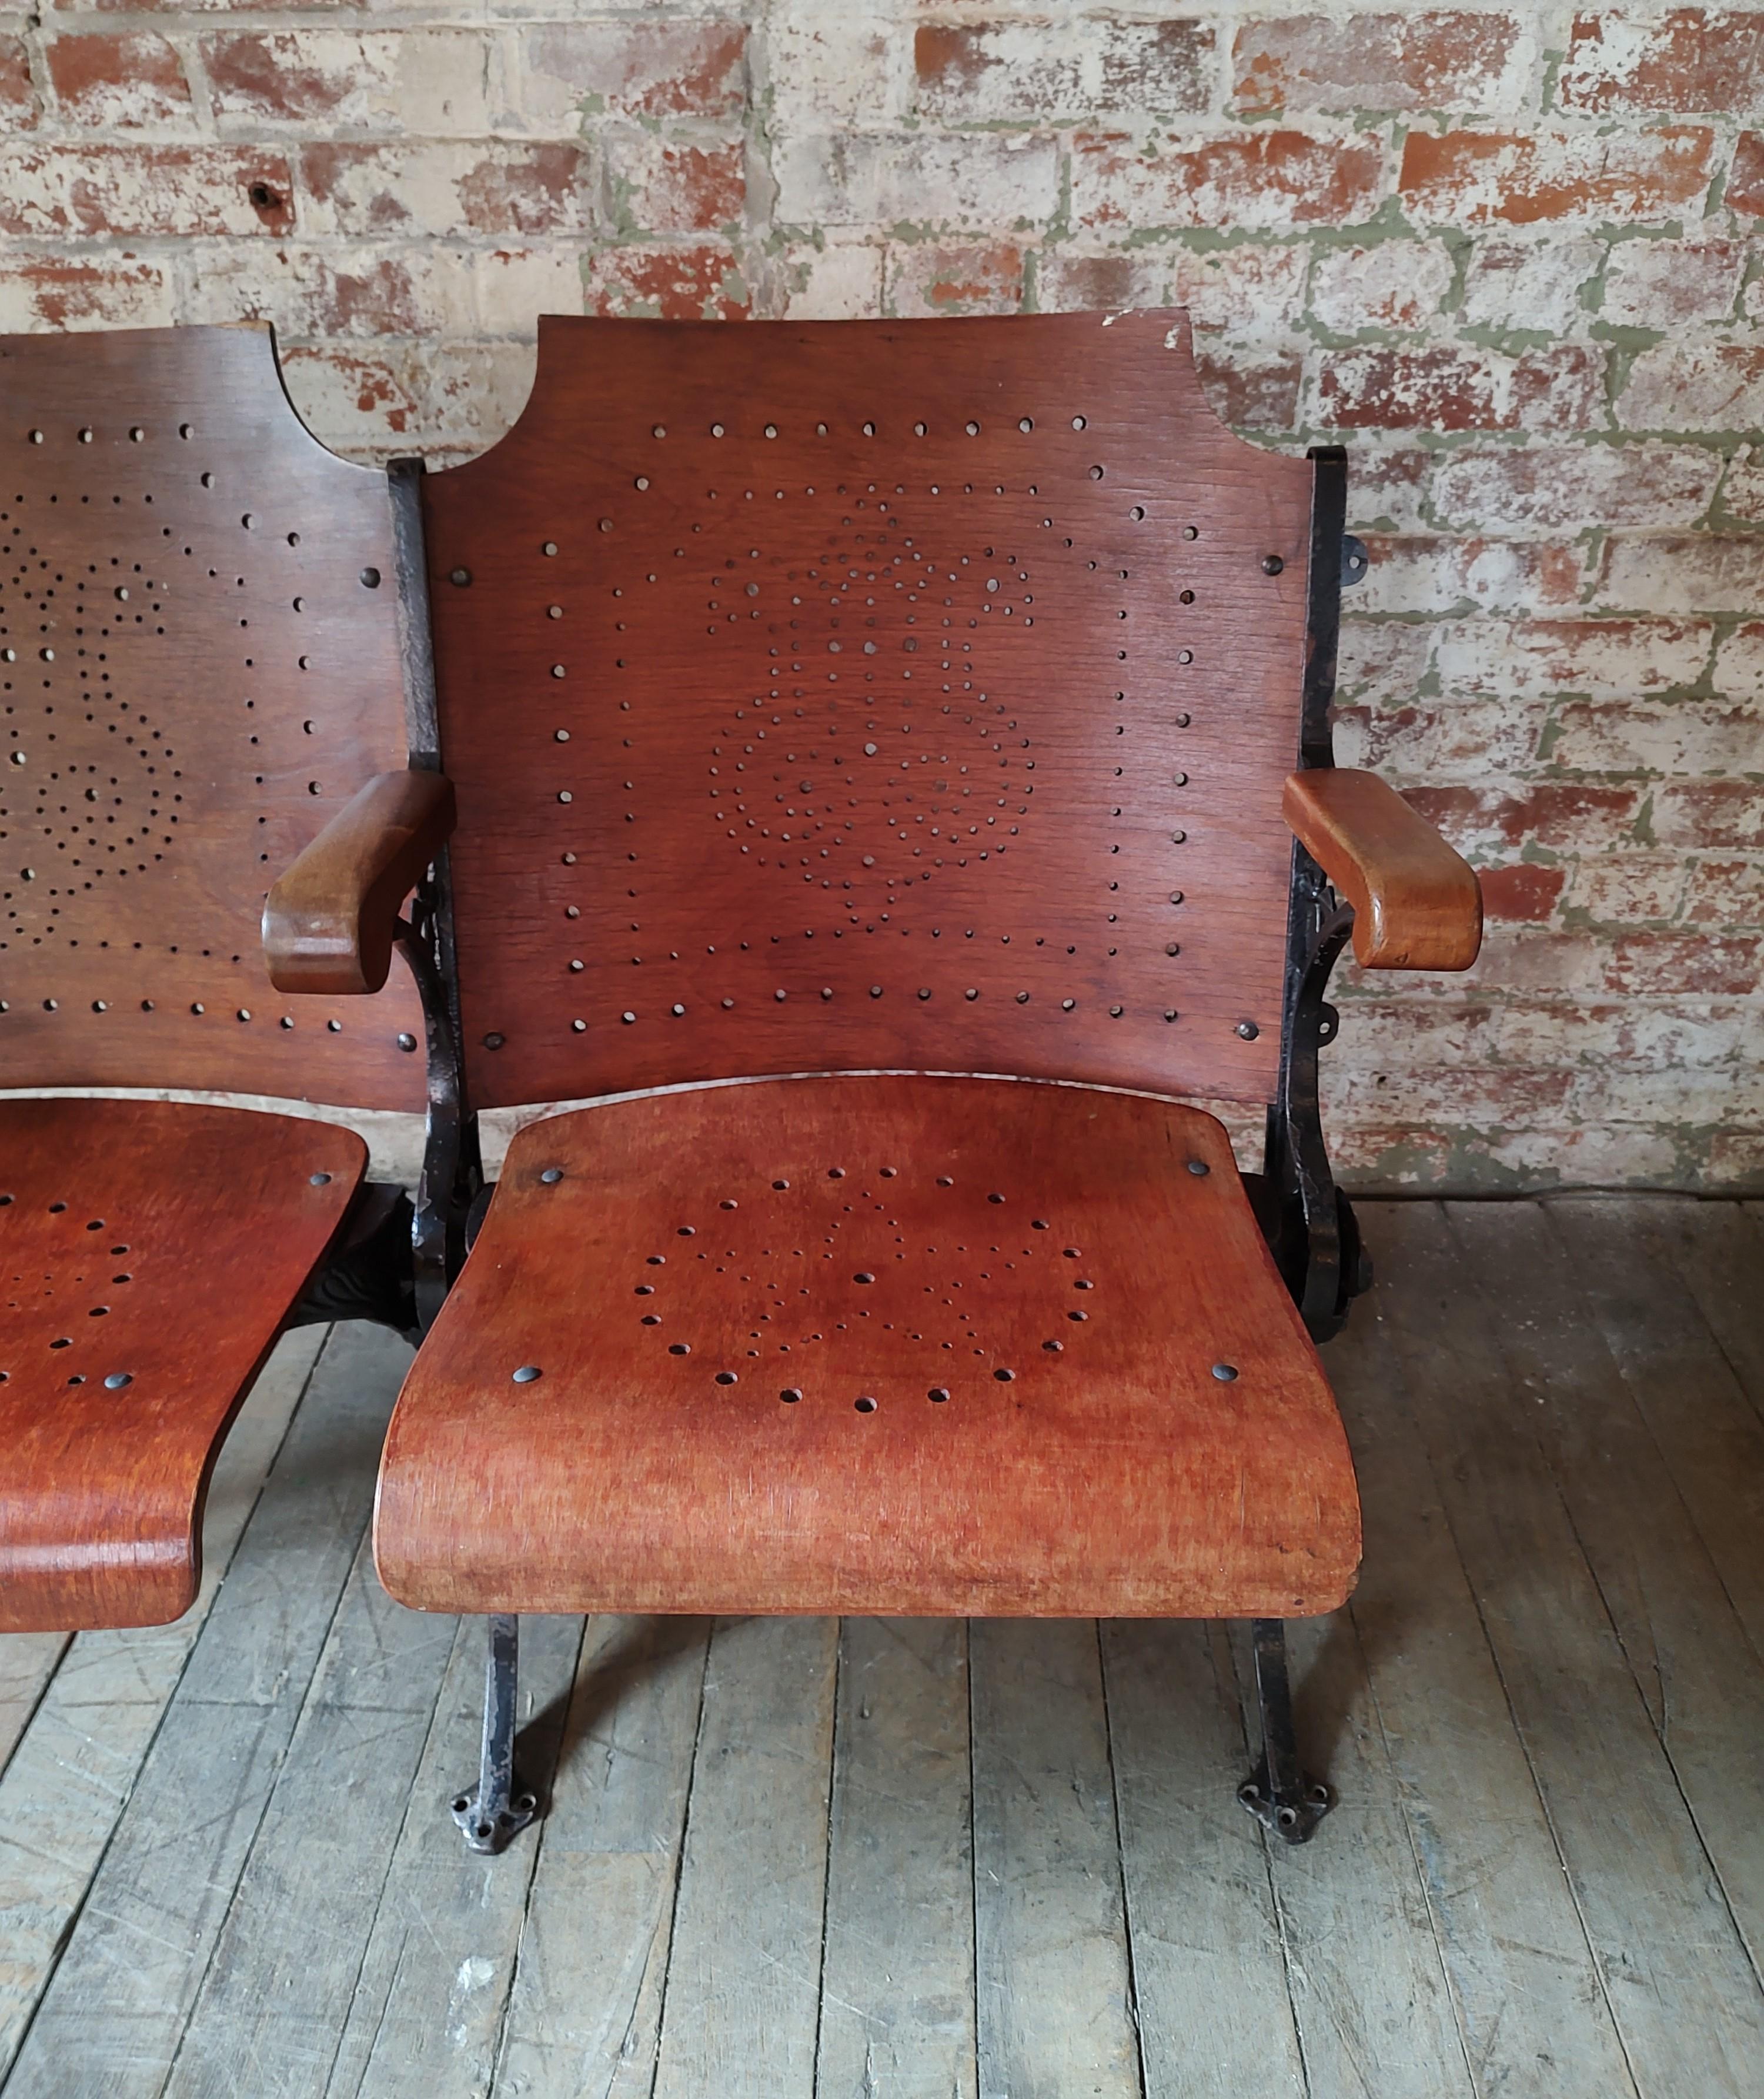 American Antique Theater Seats For Sale